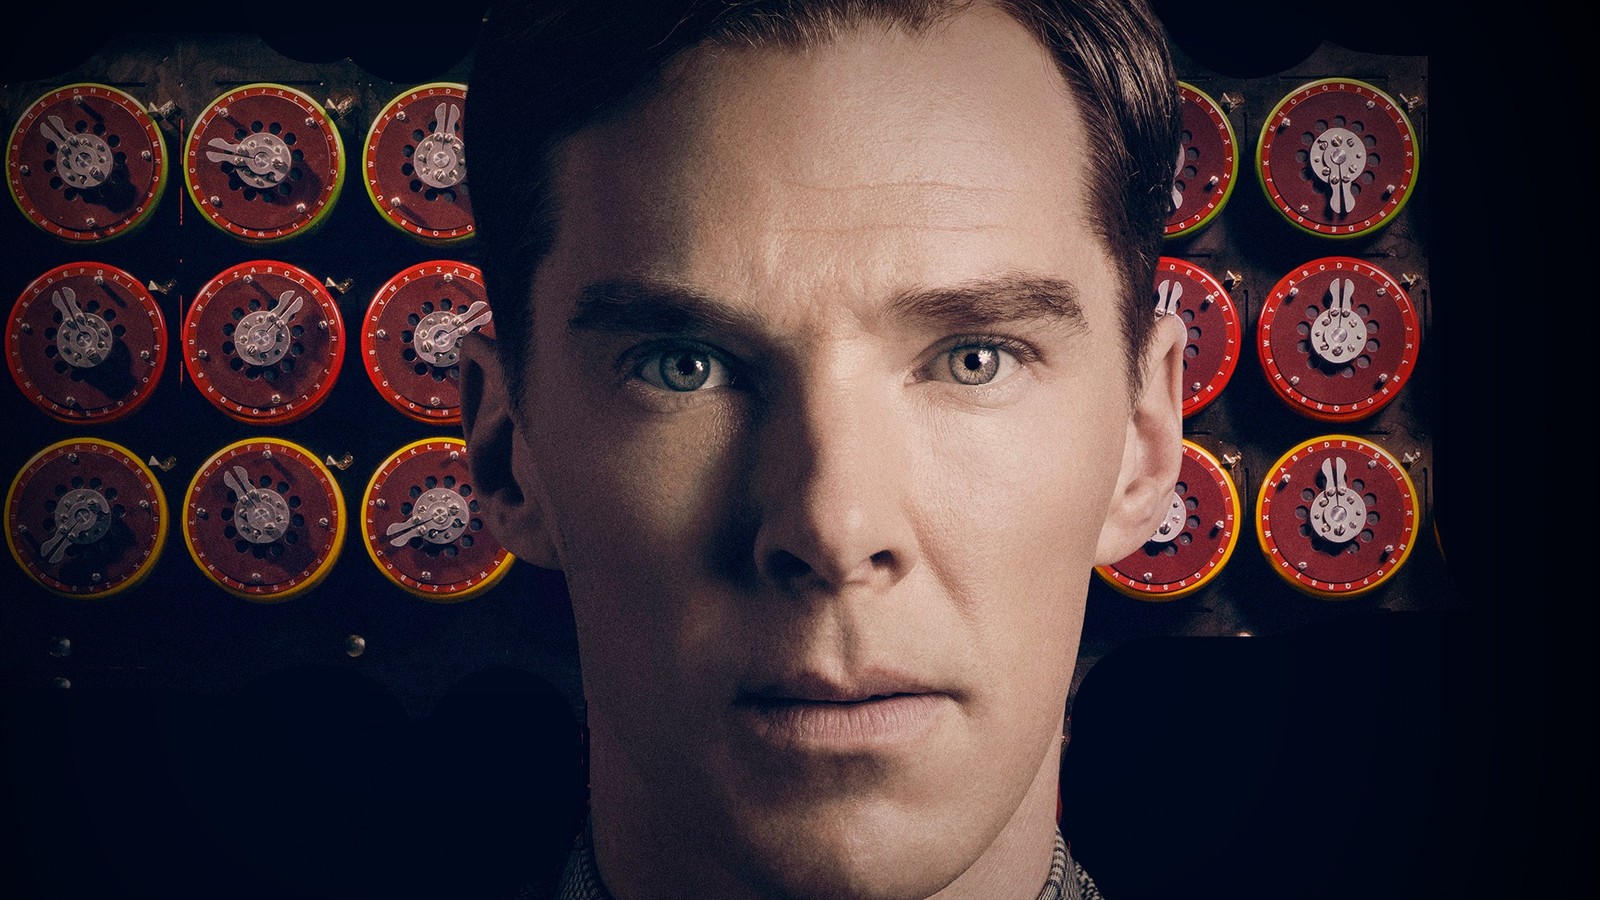 Do You Know? Benedict Cumberbatch Shares A Real Life Connection With His  'The Imitation Game' Character Alan Turing